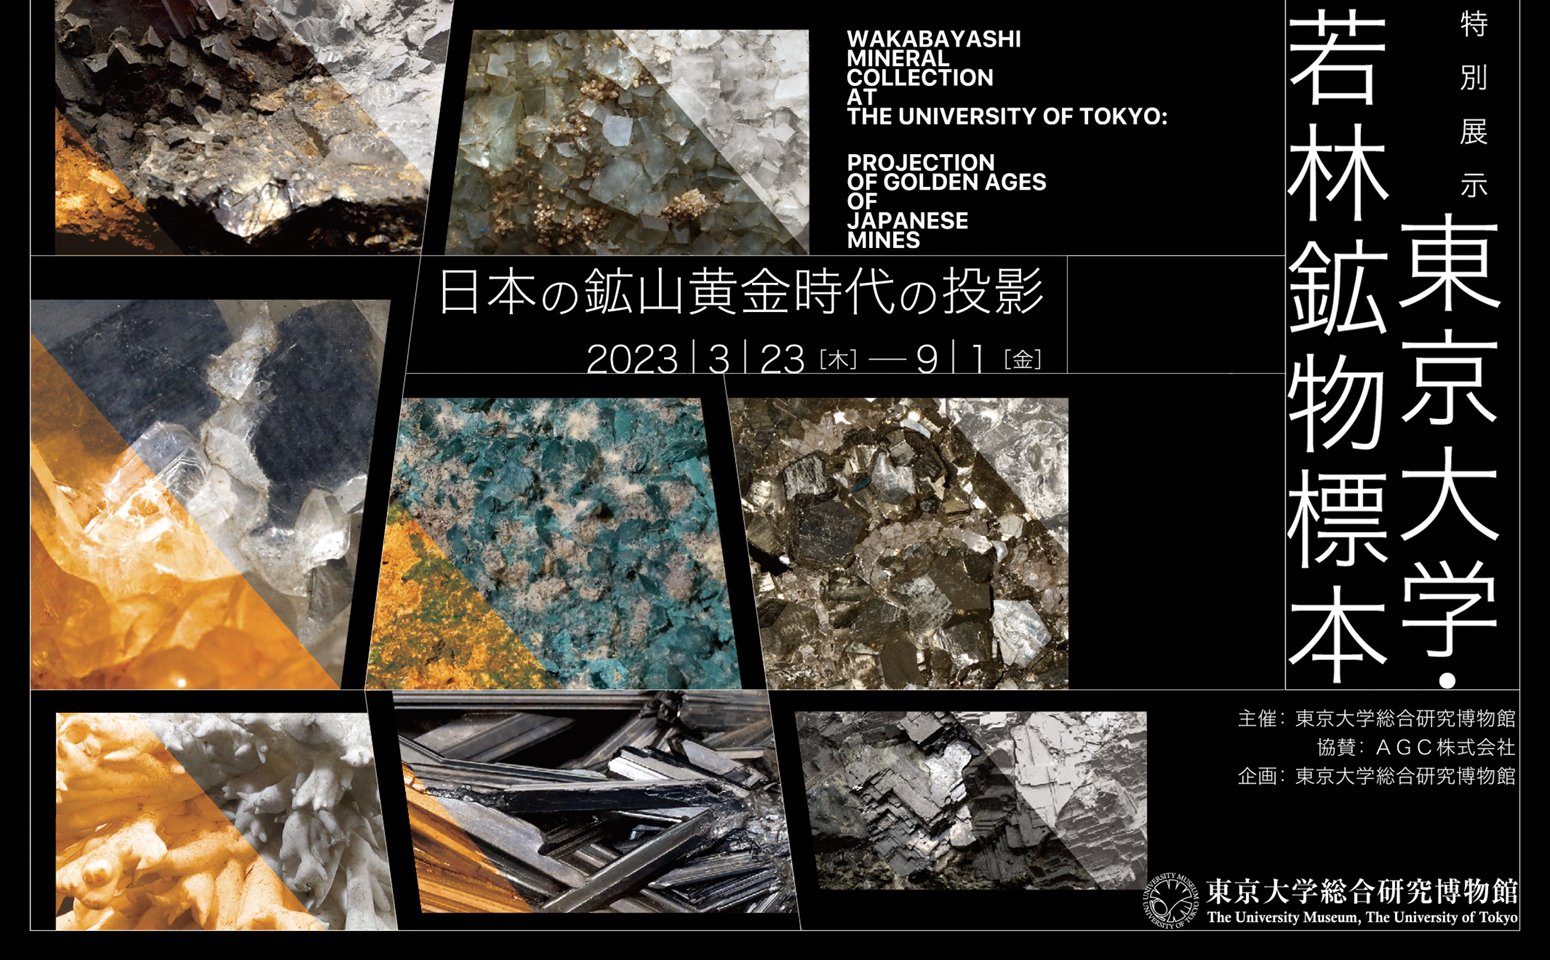 Wakabayashi Mineral Collection at the University of Tokyo: Projection of Golden Ages of Japanese Mines